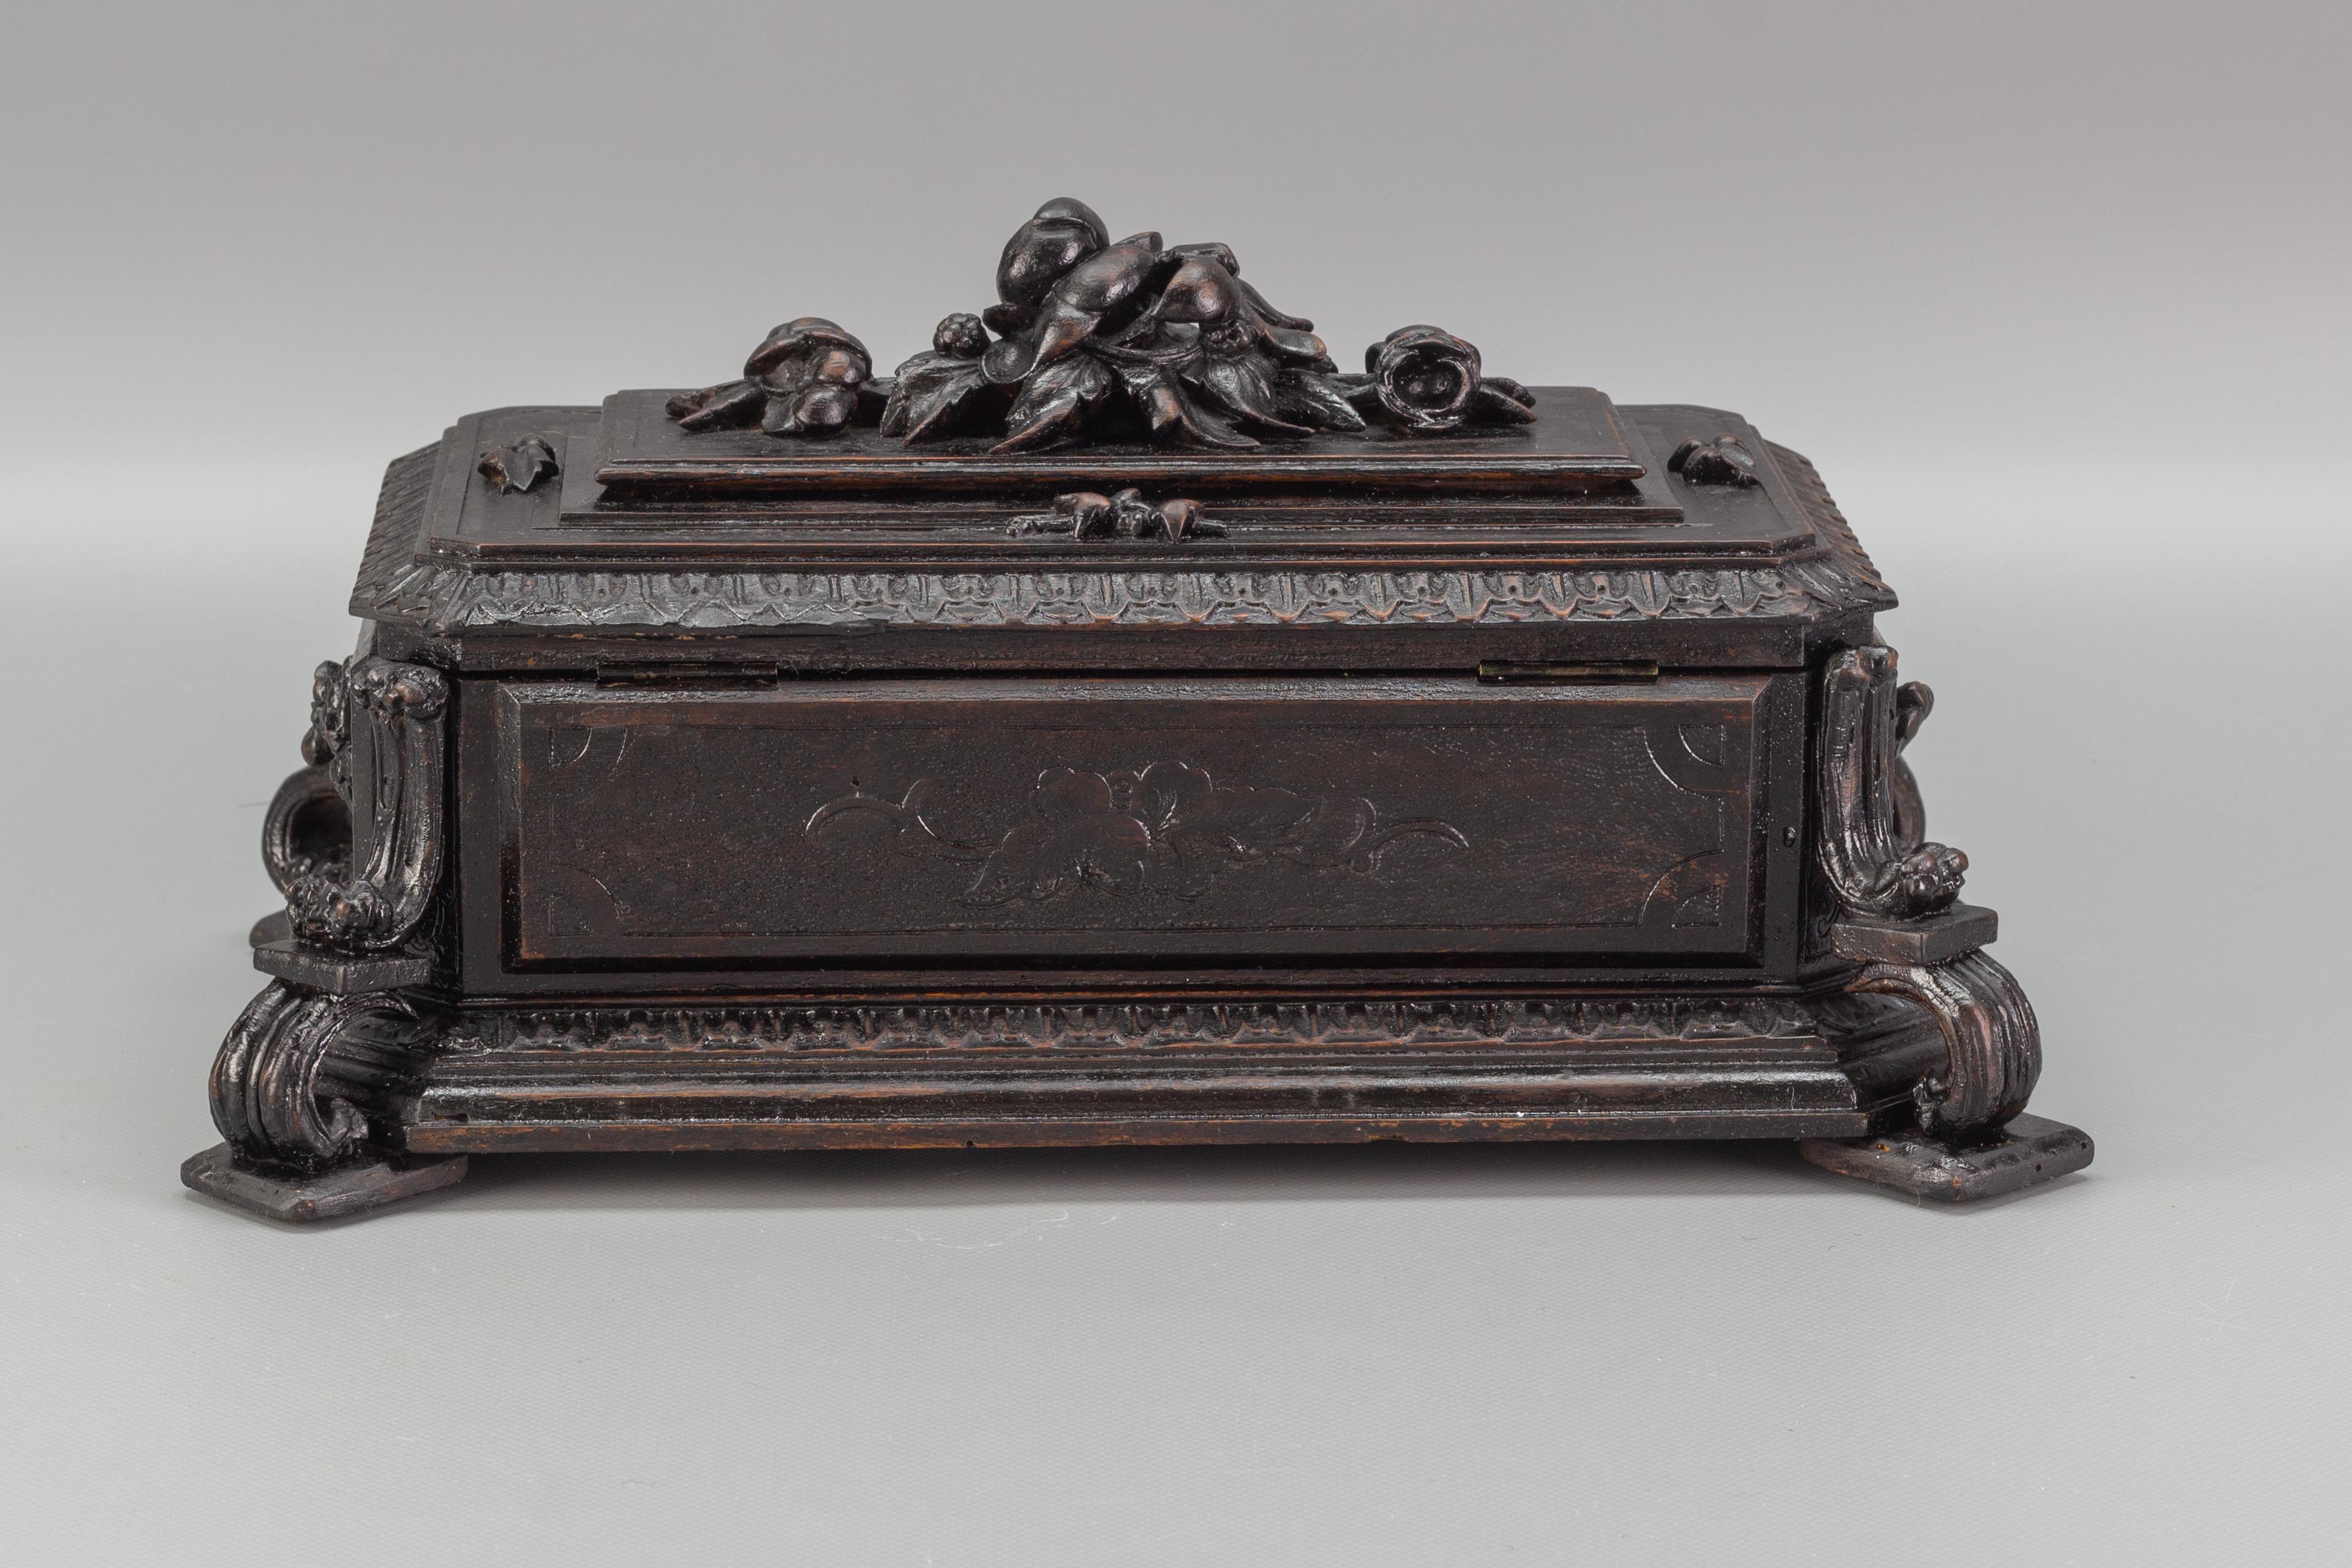 Velvet Antique German Hand Carved Wooden Jewelry Box, Early 20th Century